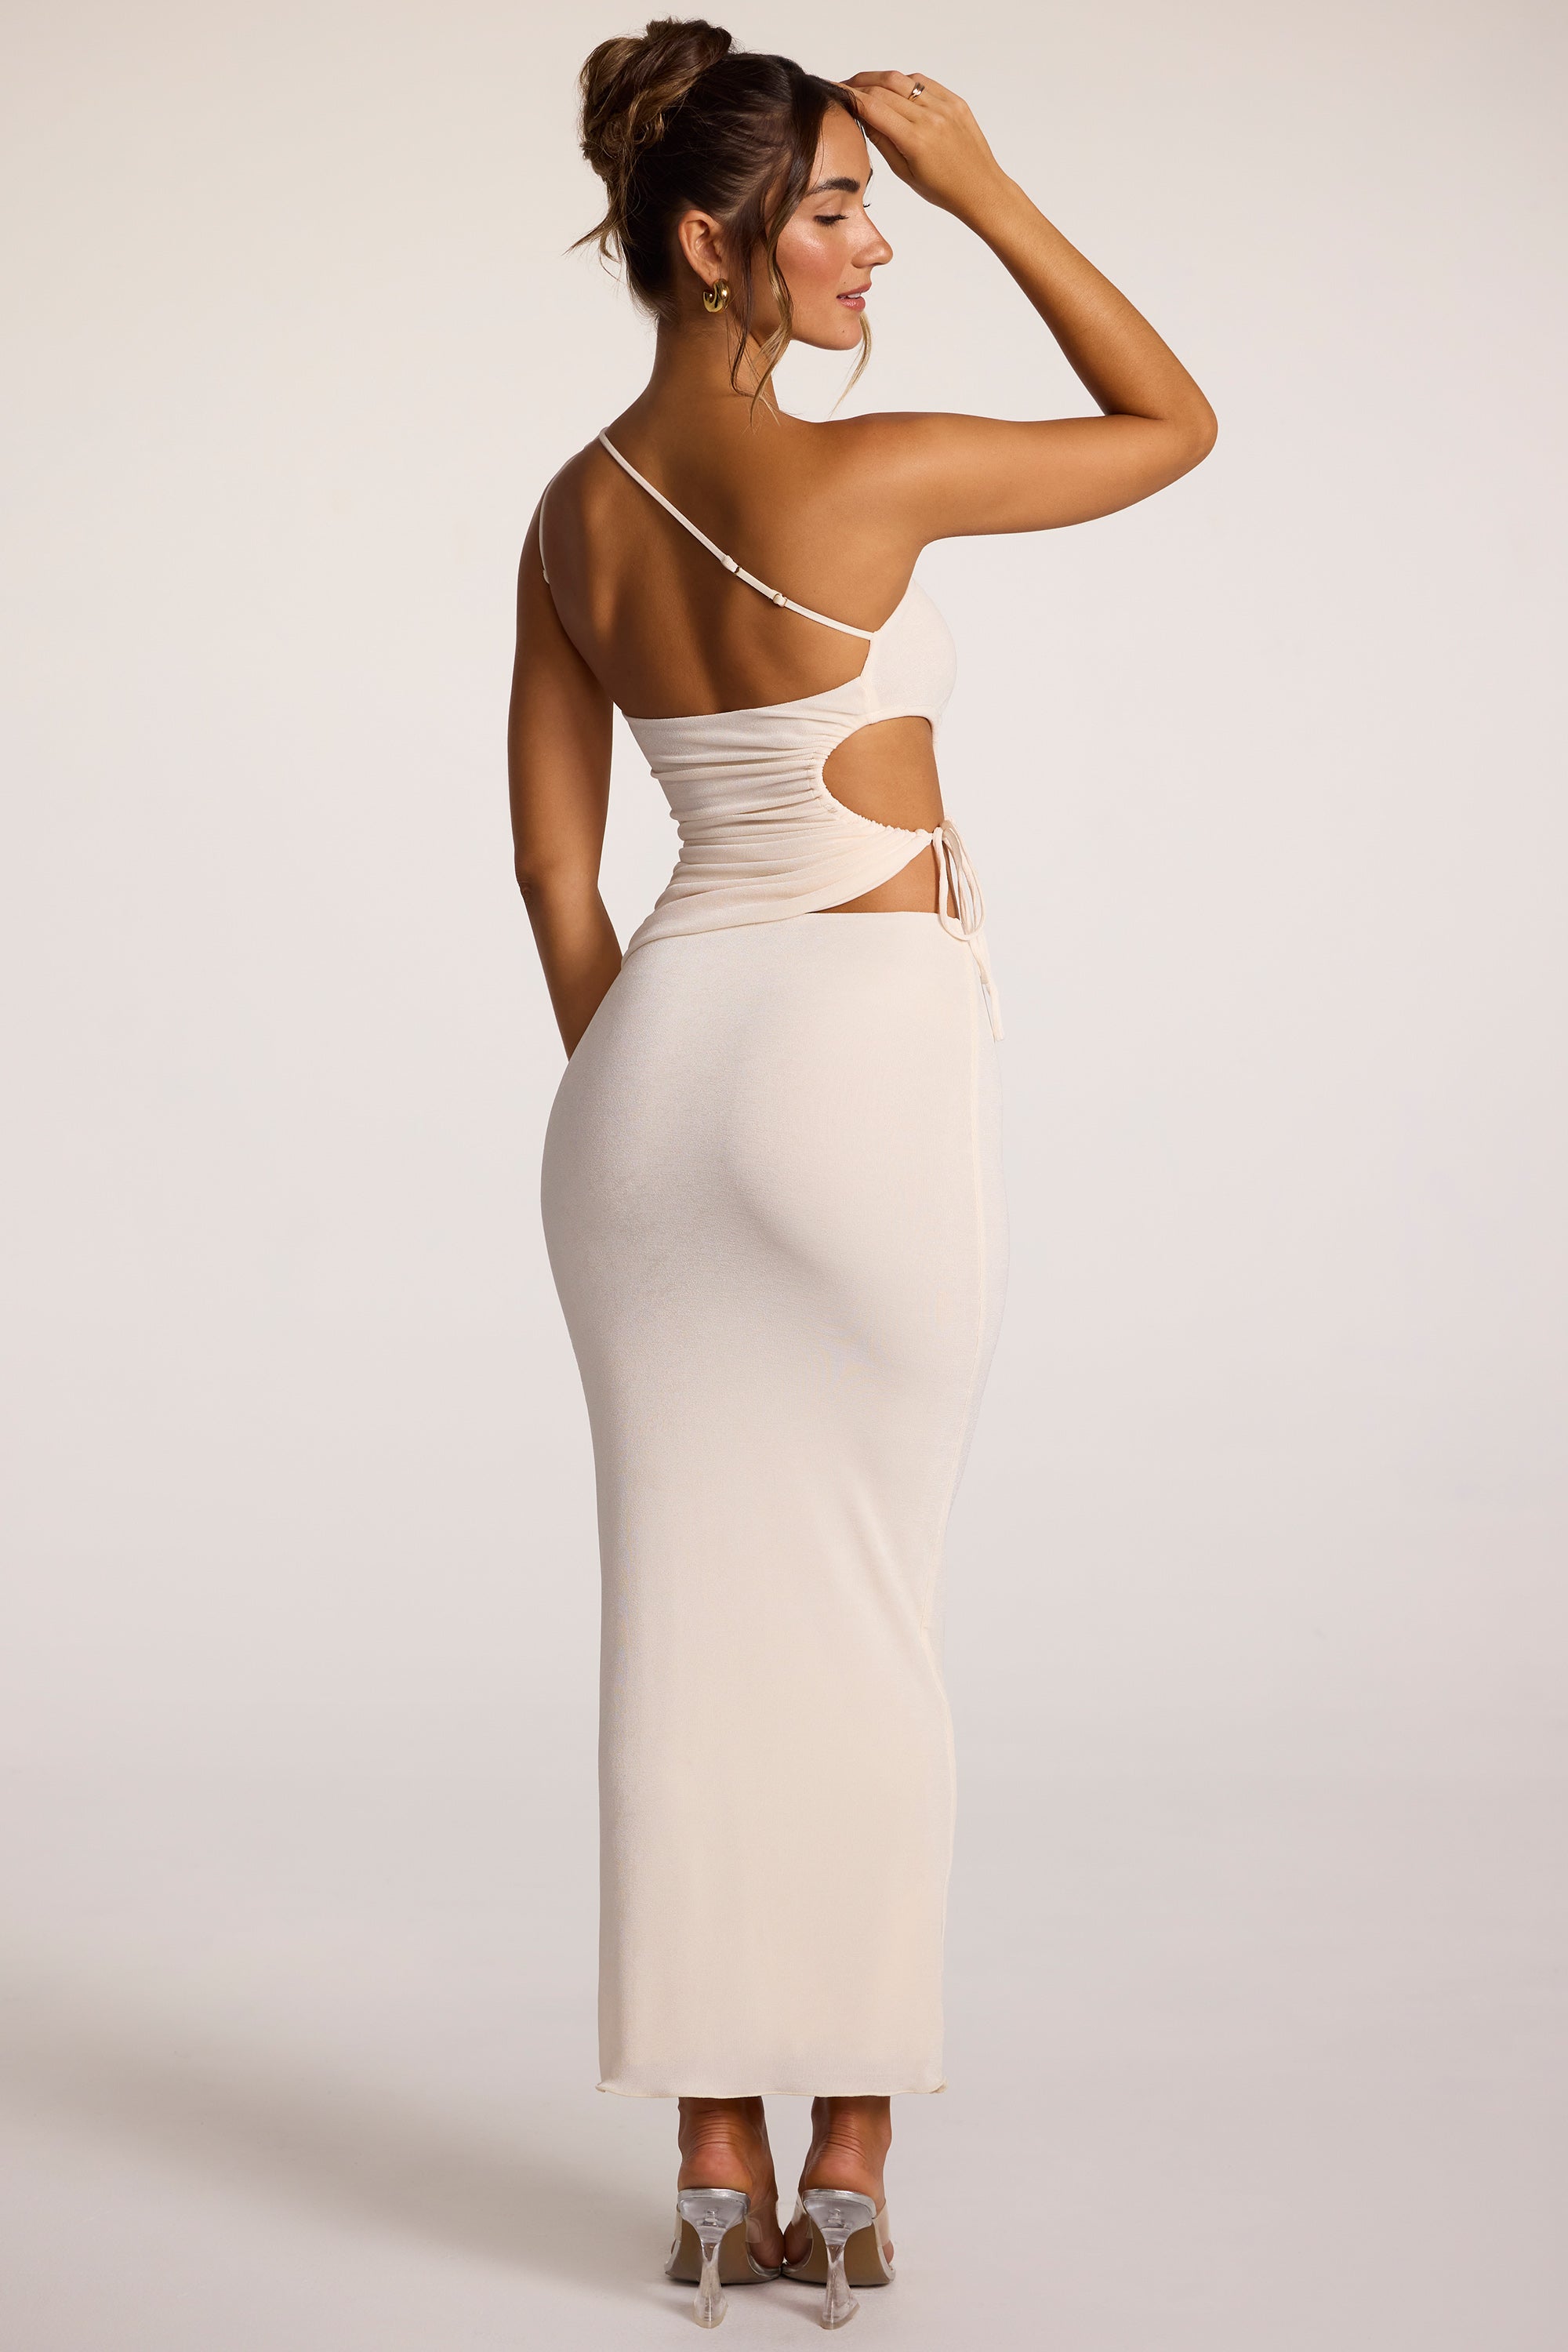 Elena Textured Jersey Low-Rise Maxi Skirt in Ivory | Oh Polly